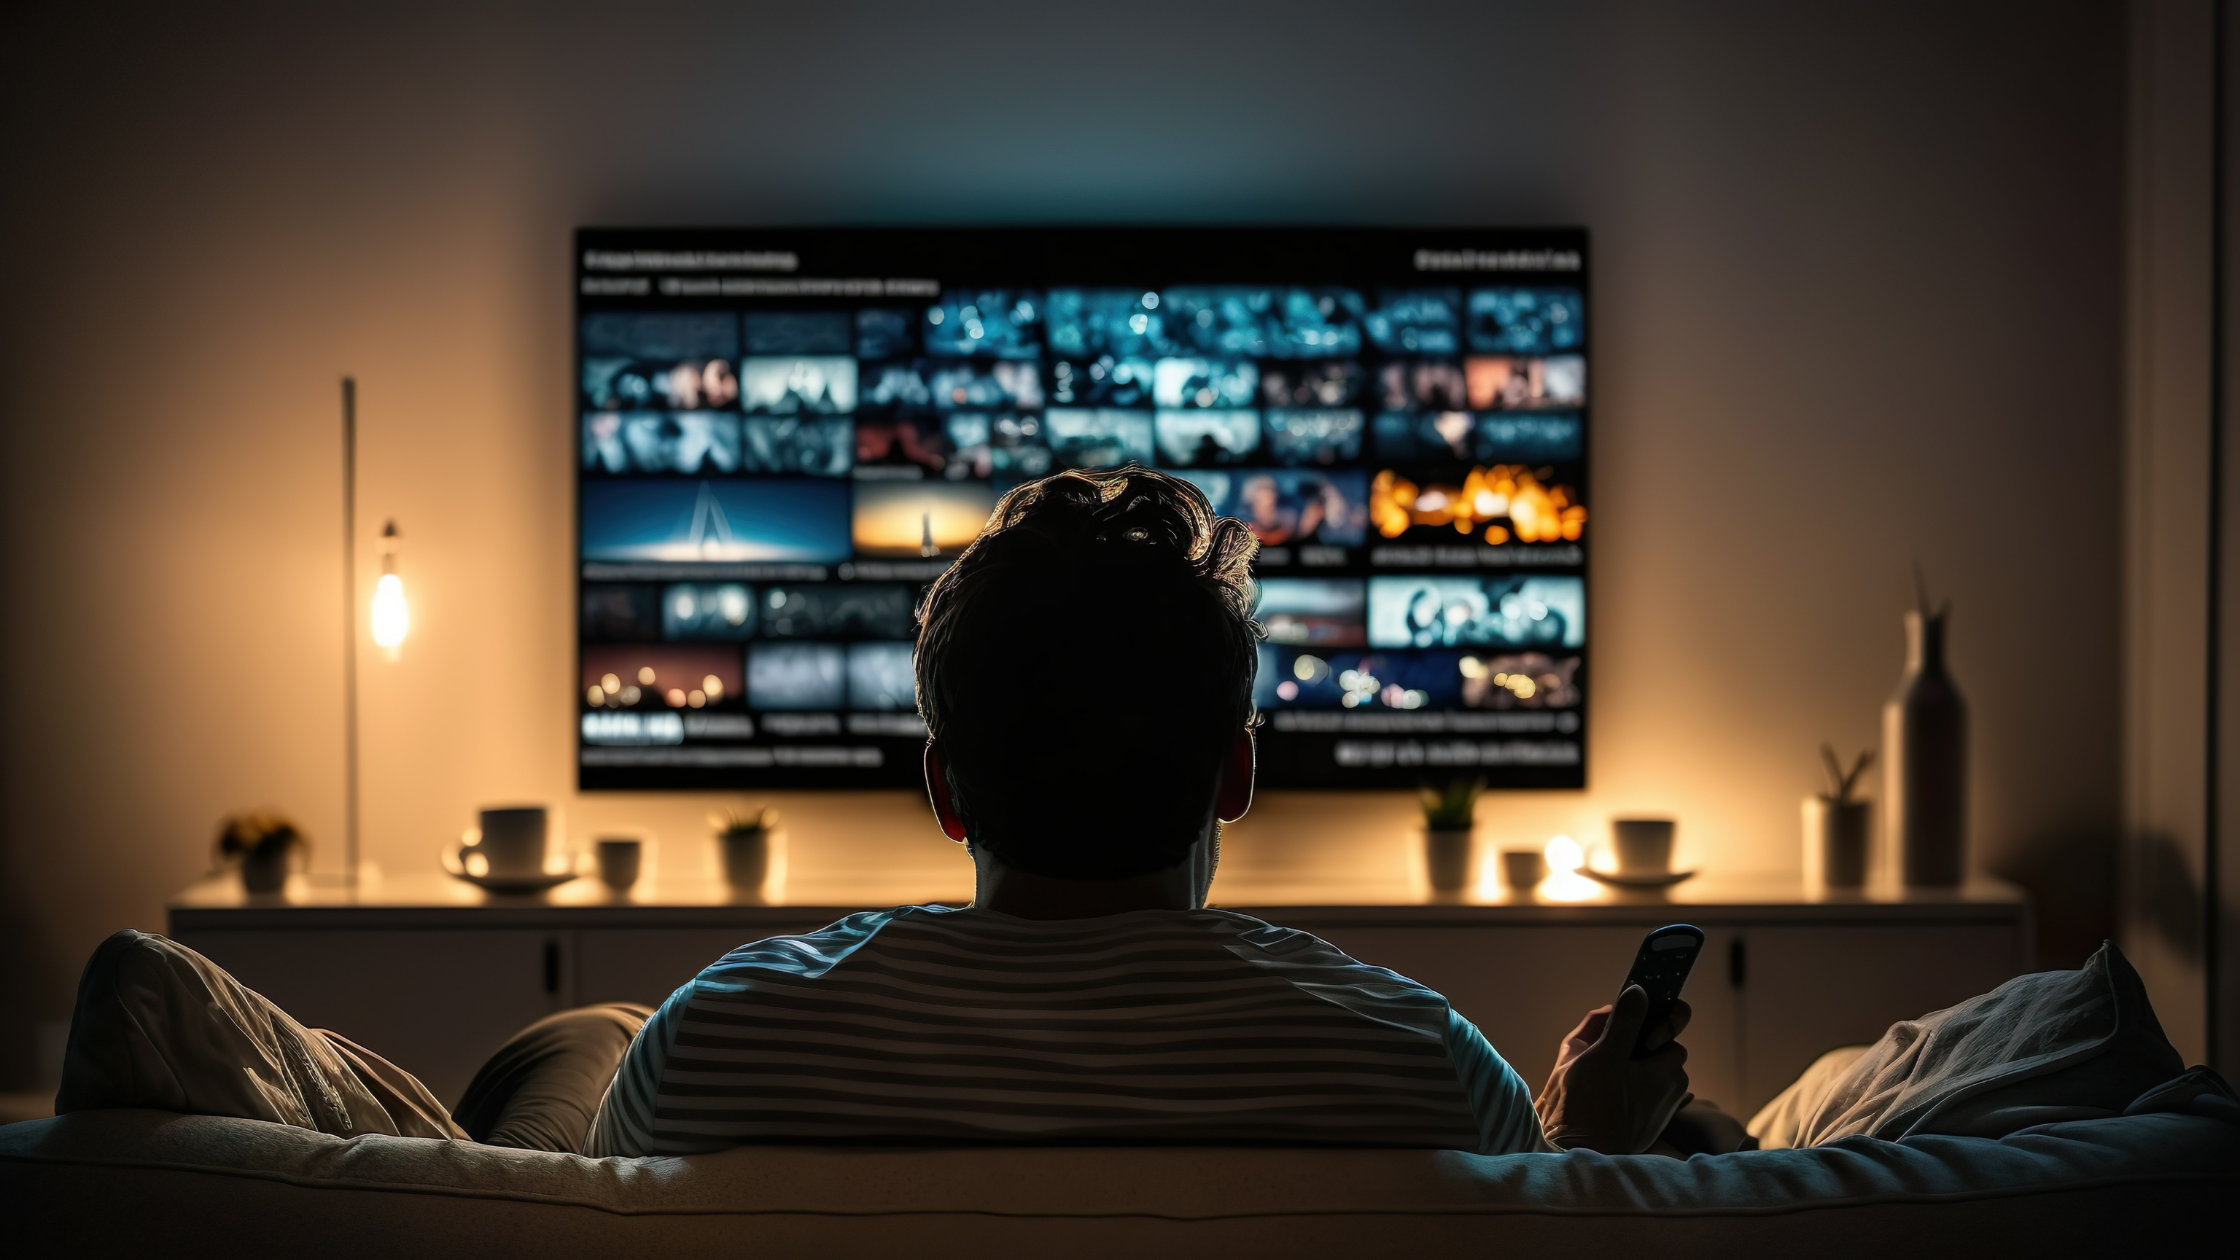 Man on sofa about to watch TV, looking over at personalised recommendations of TV shows to watch